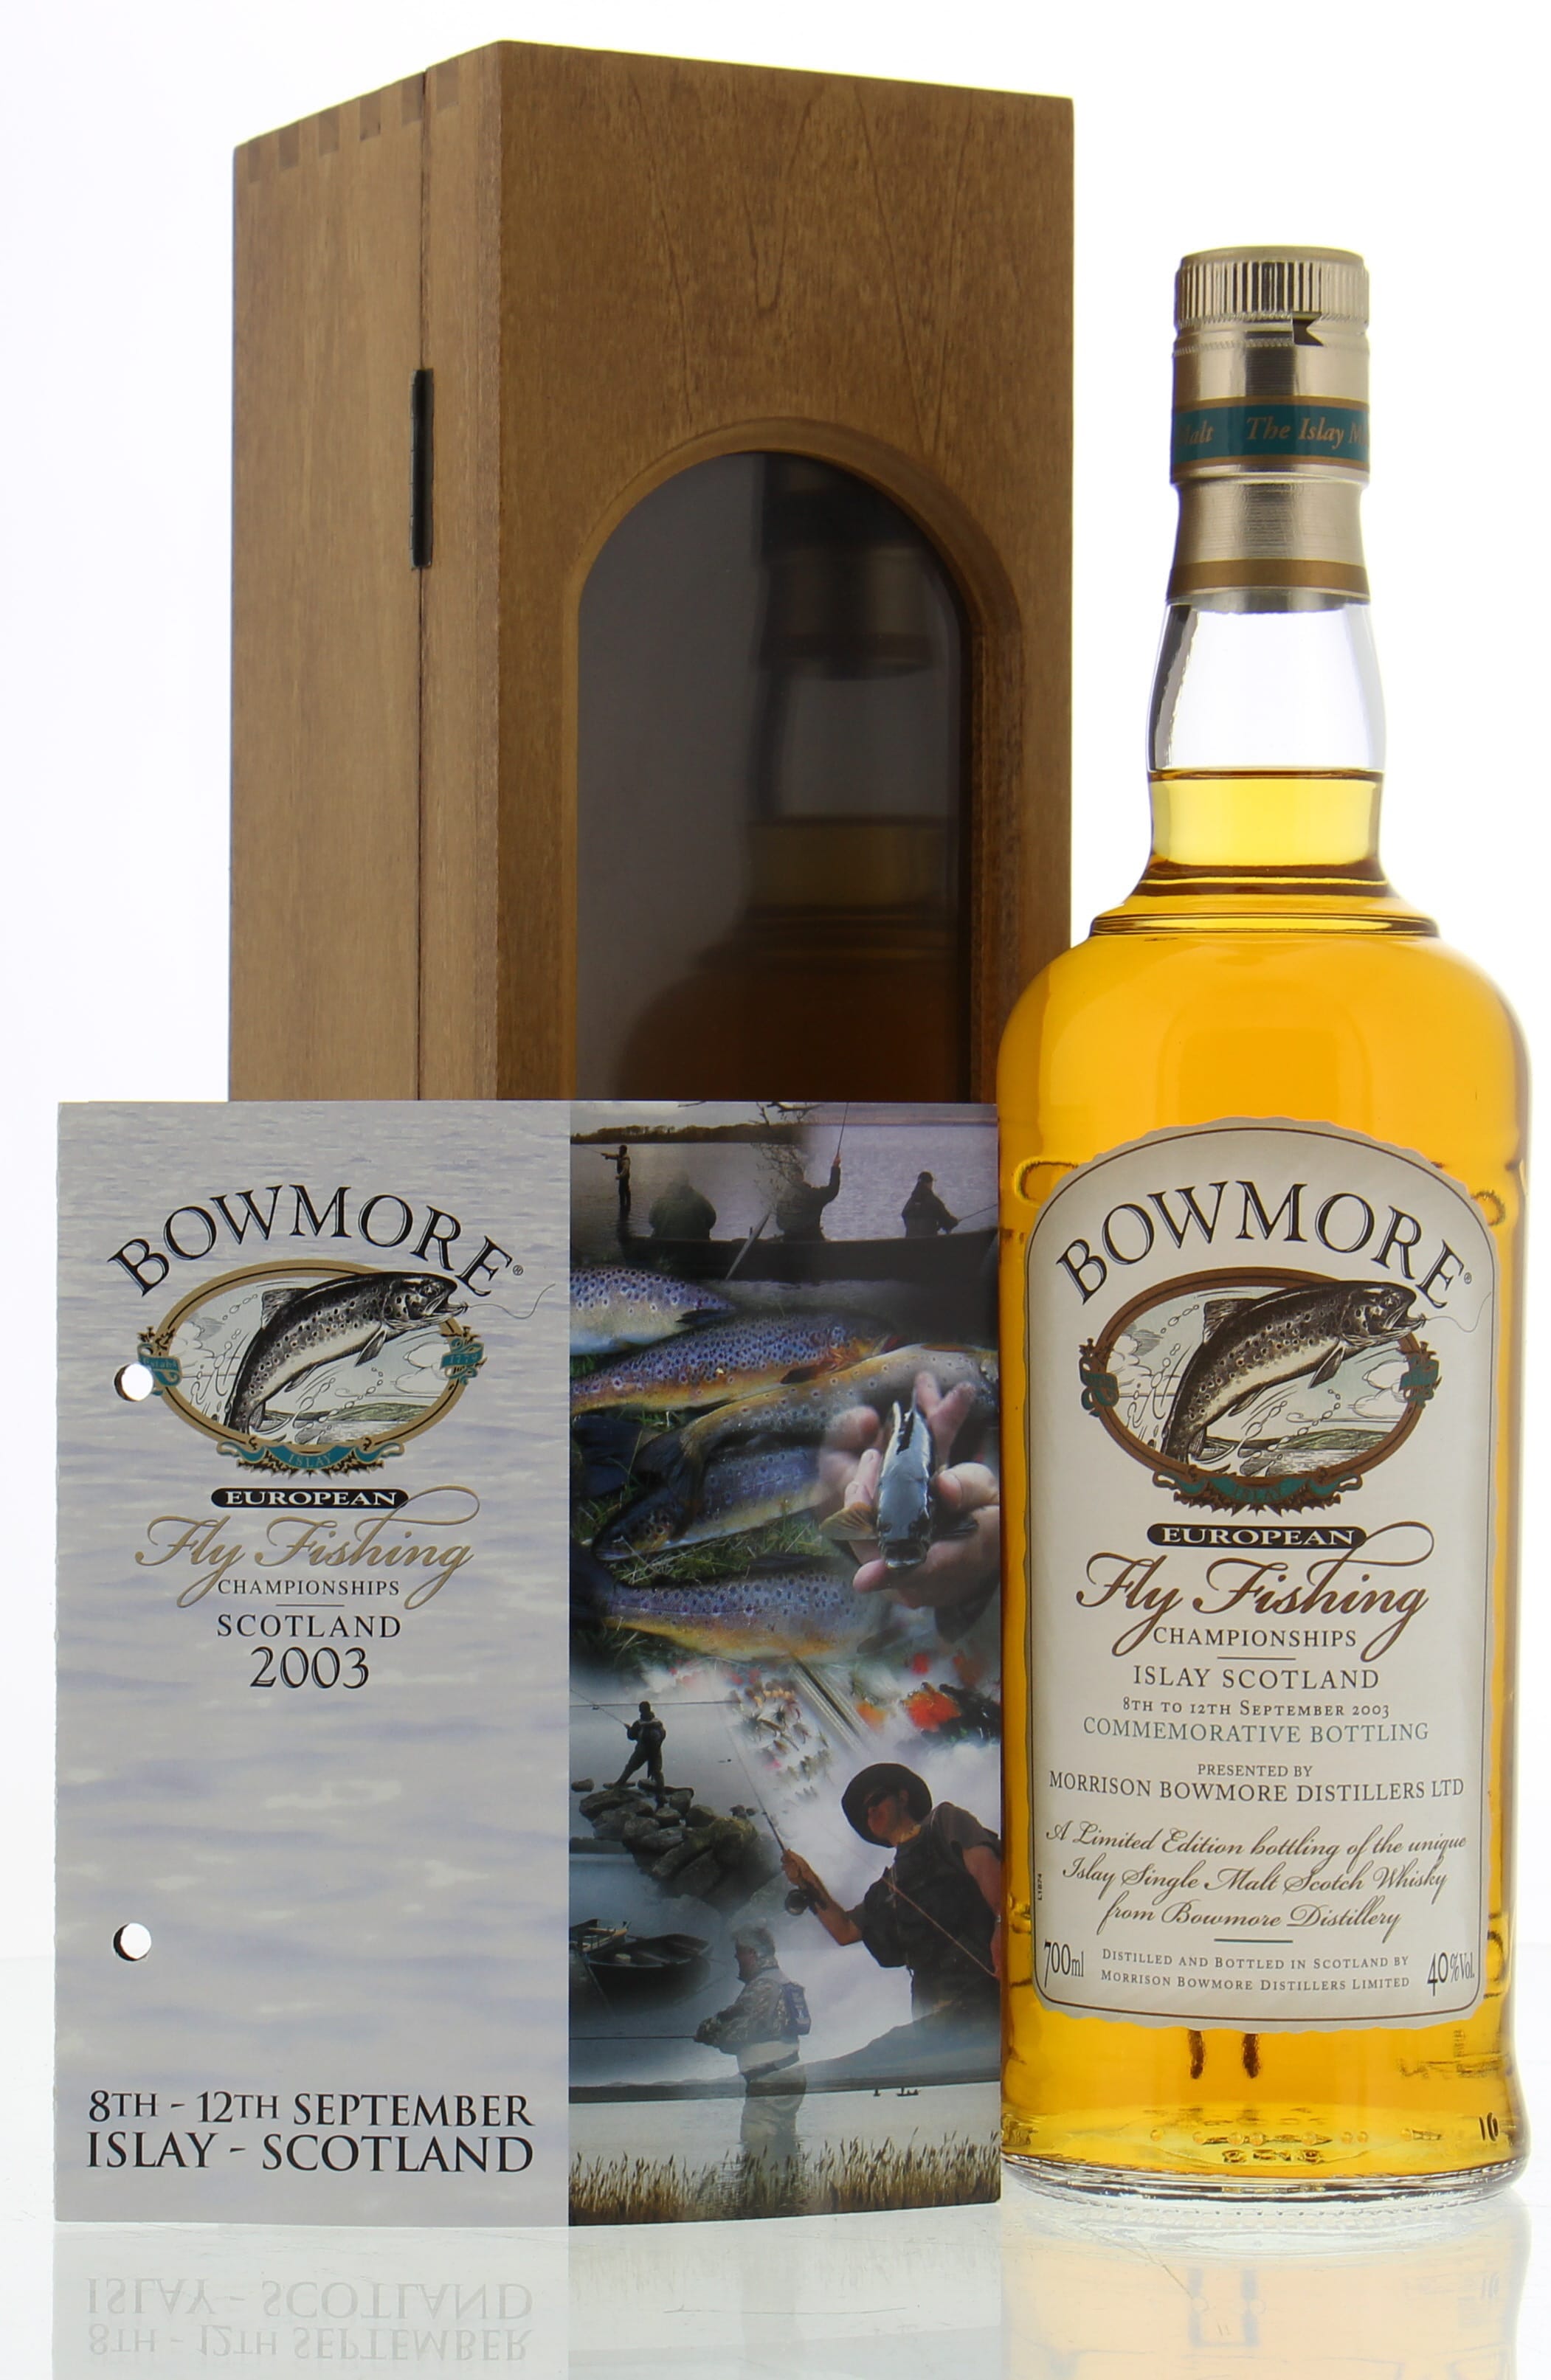 Bowmore - European Fly Fishing Championship 2003 Commemorative 40% NV In Original Wooden Case